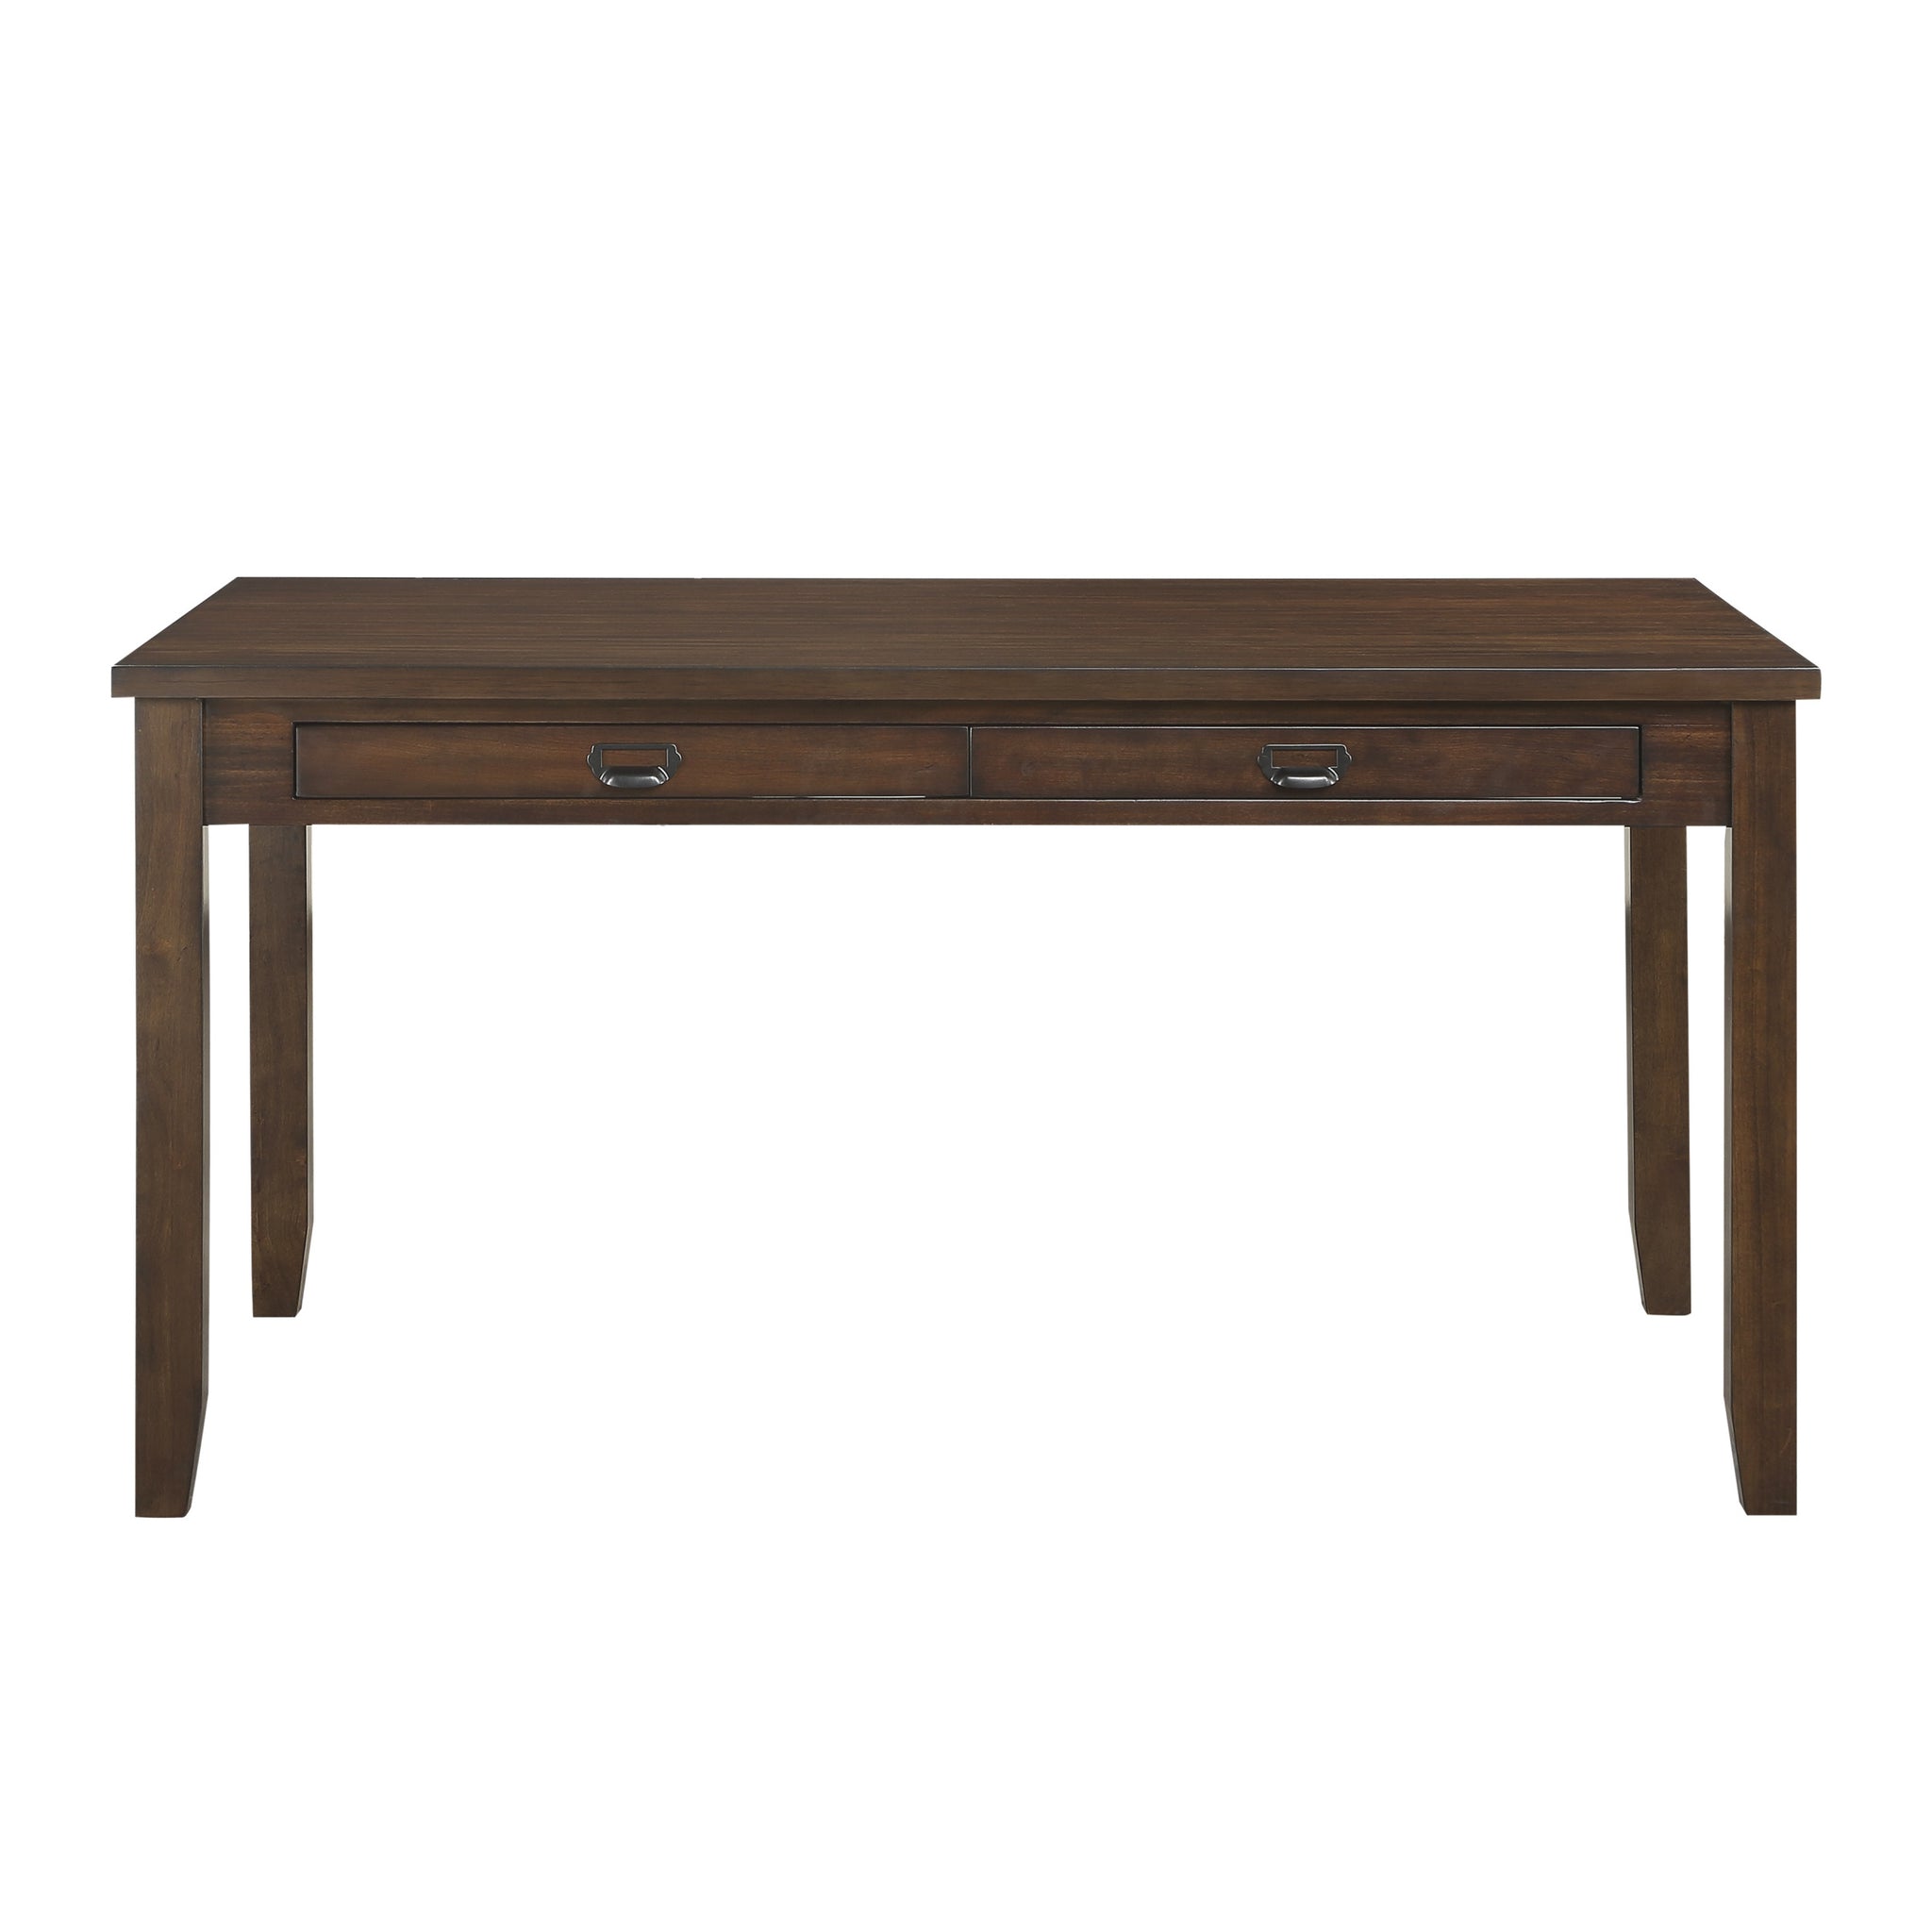 Dark Cherry Finish Dining Table with 4 Drawers 1pc cherry-seats 6-dining room-kitchen & dining